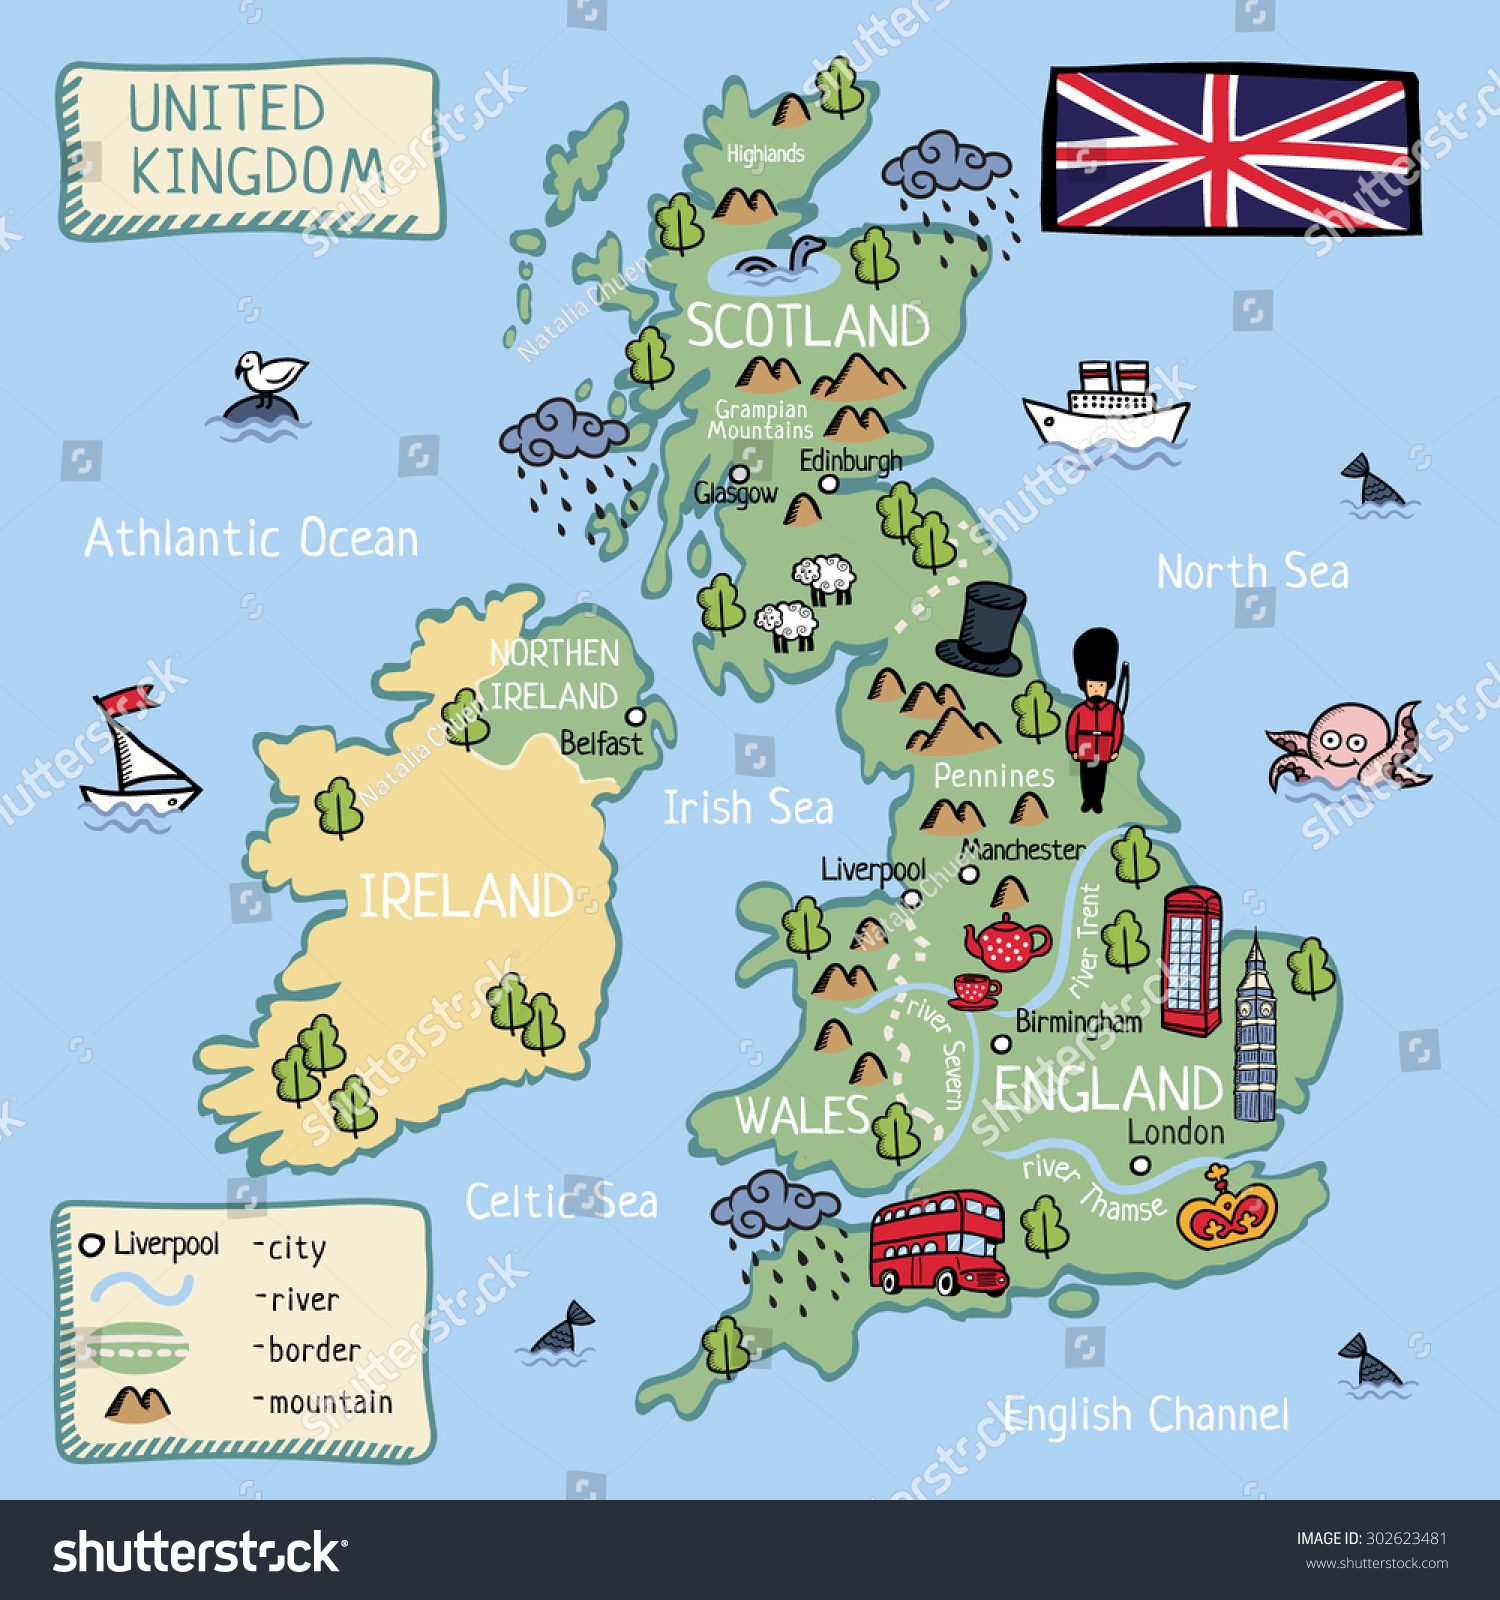 clipart map of scotland - photo #19